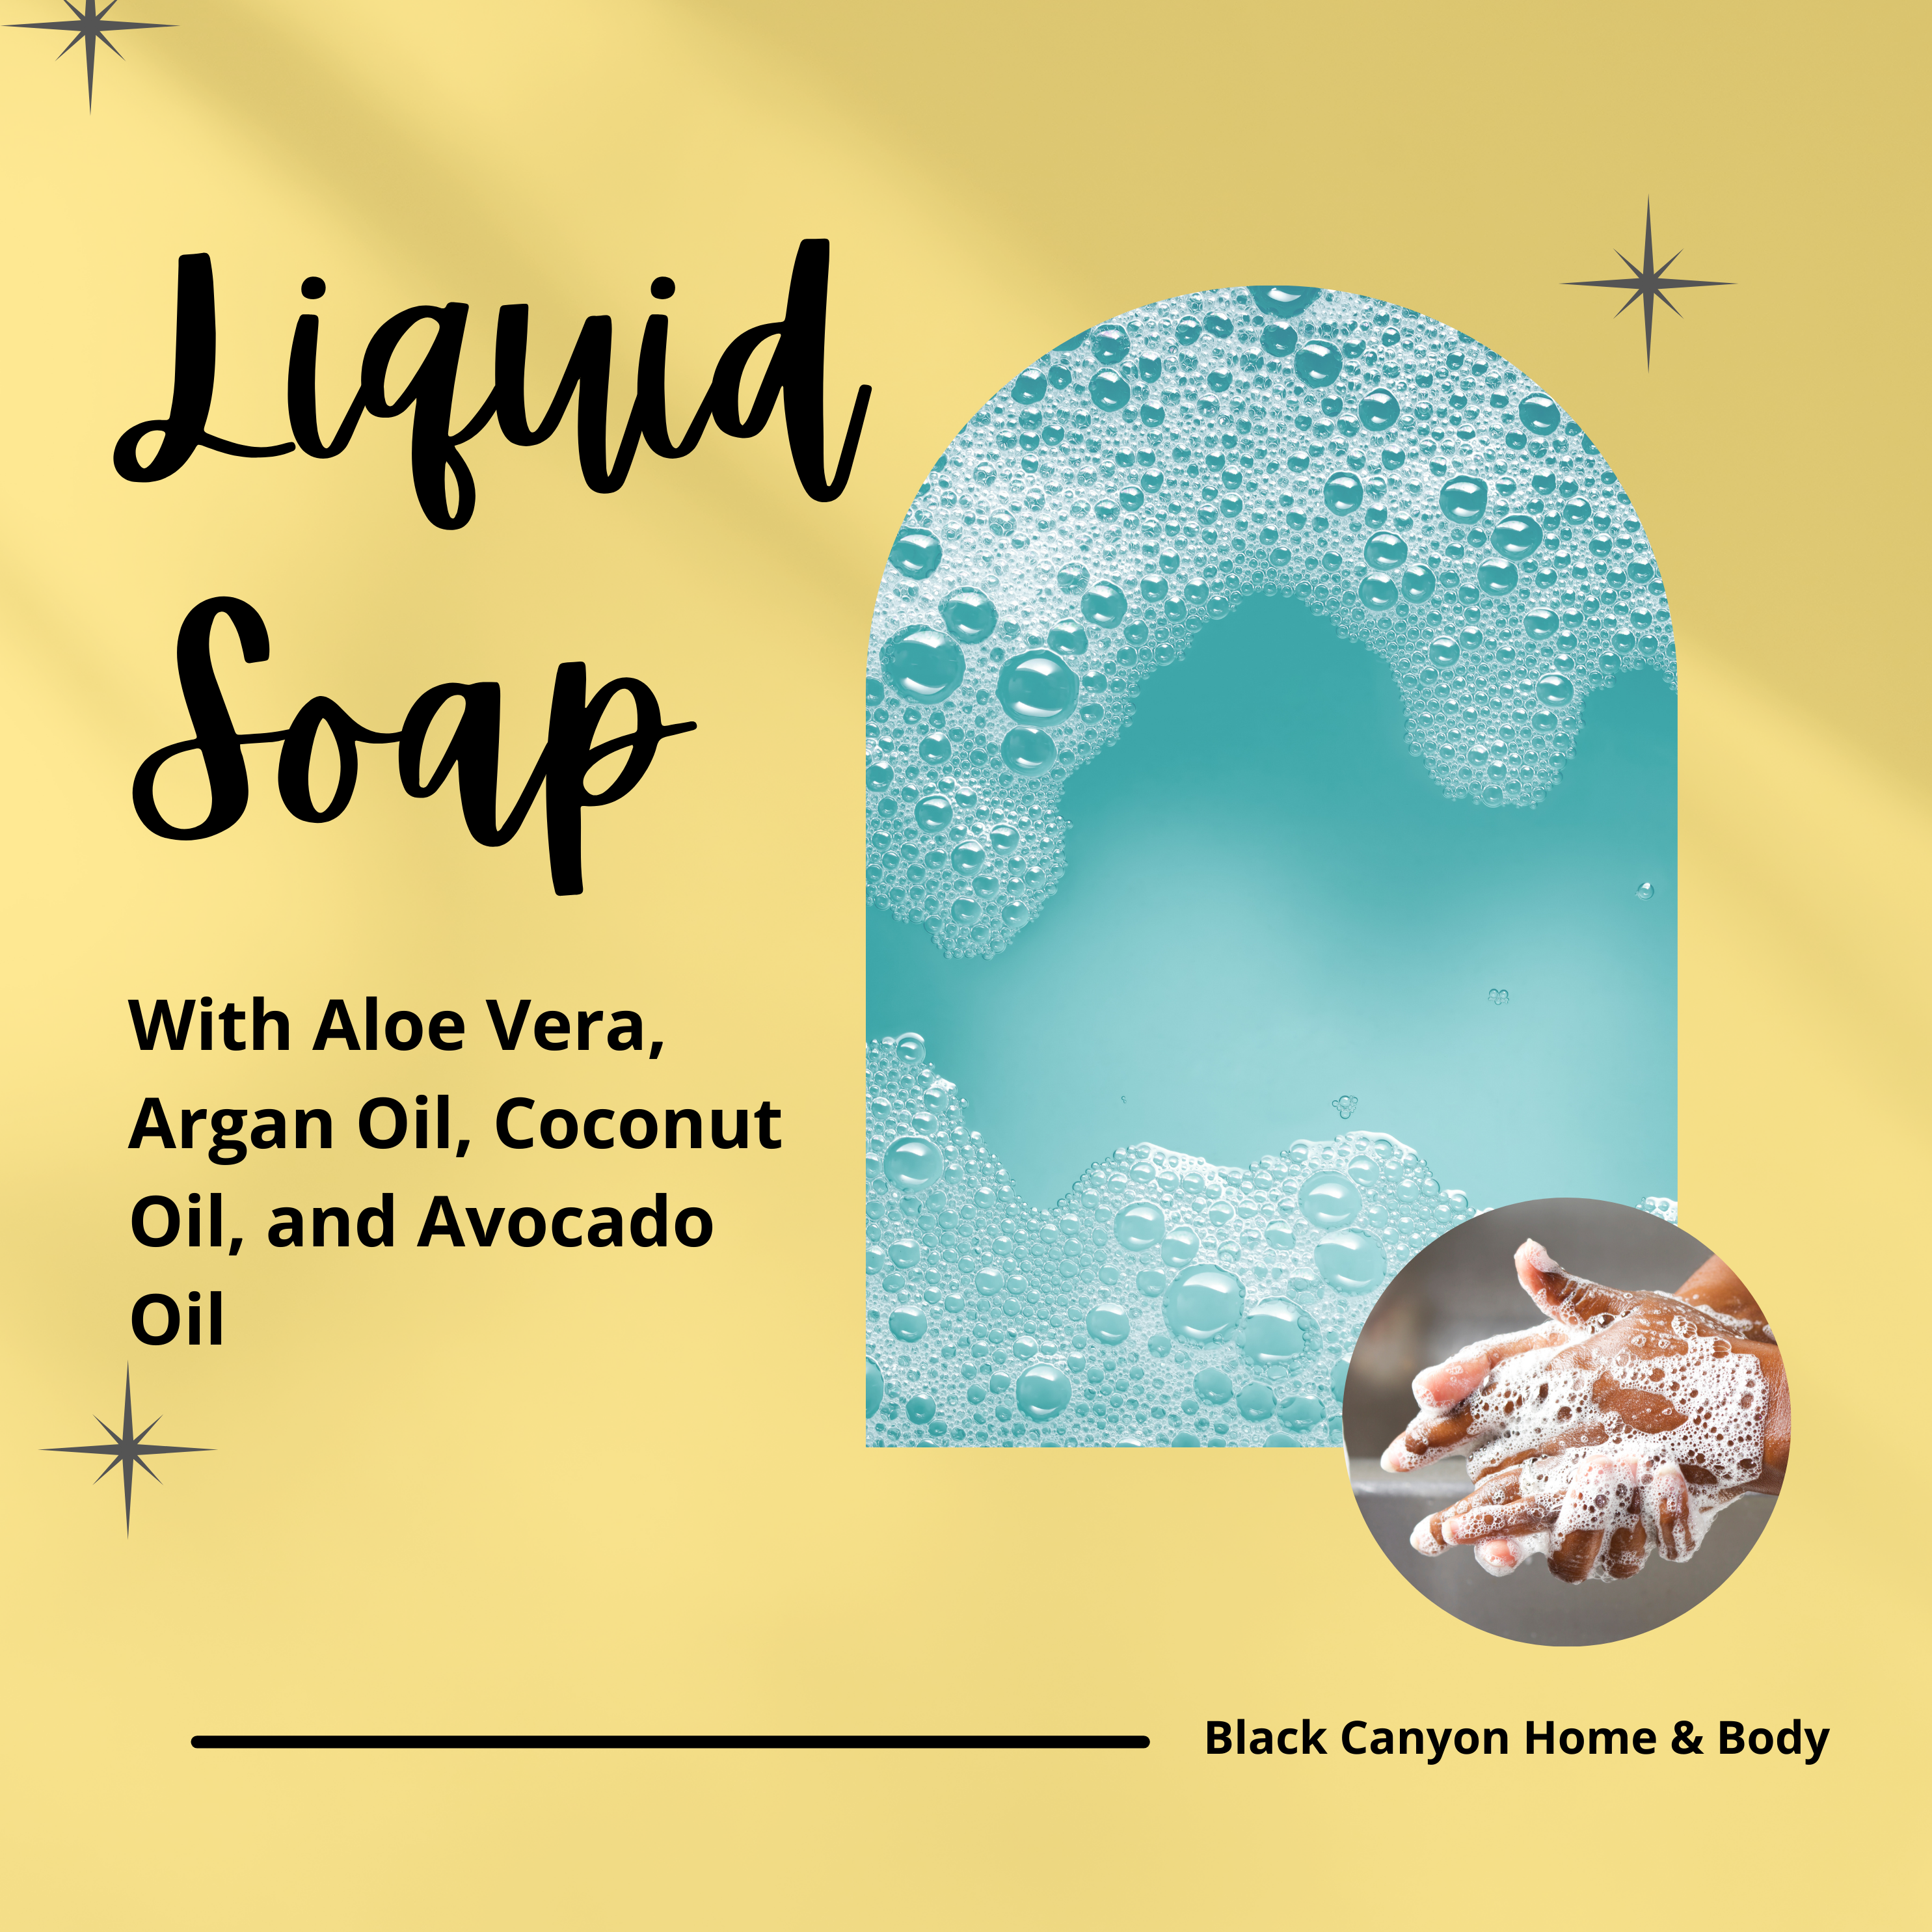 Black Canyon Christmas Eve Scented Liquid Hand Soap